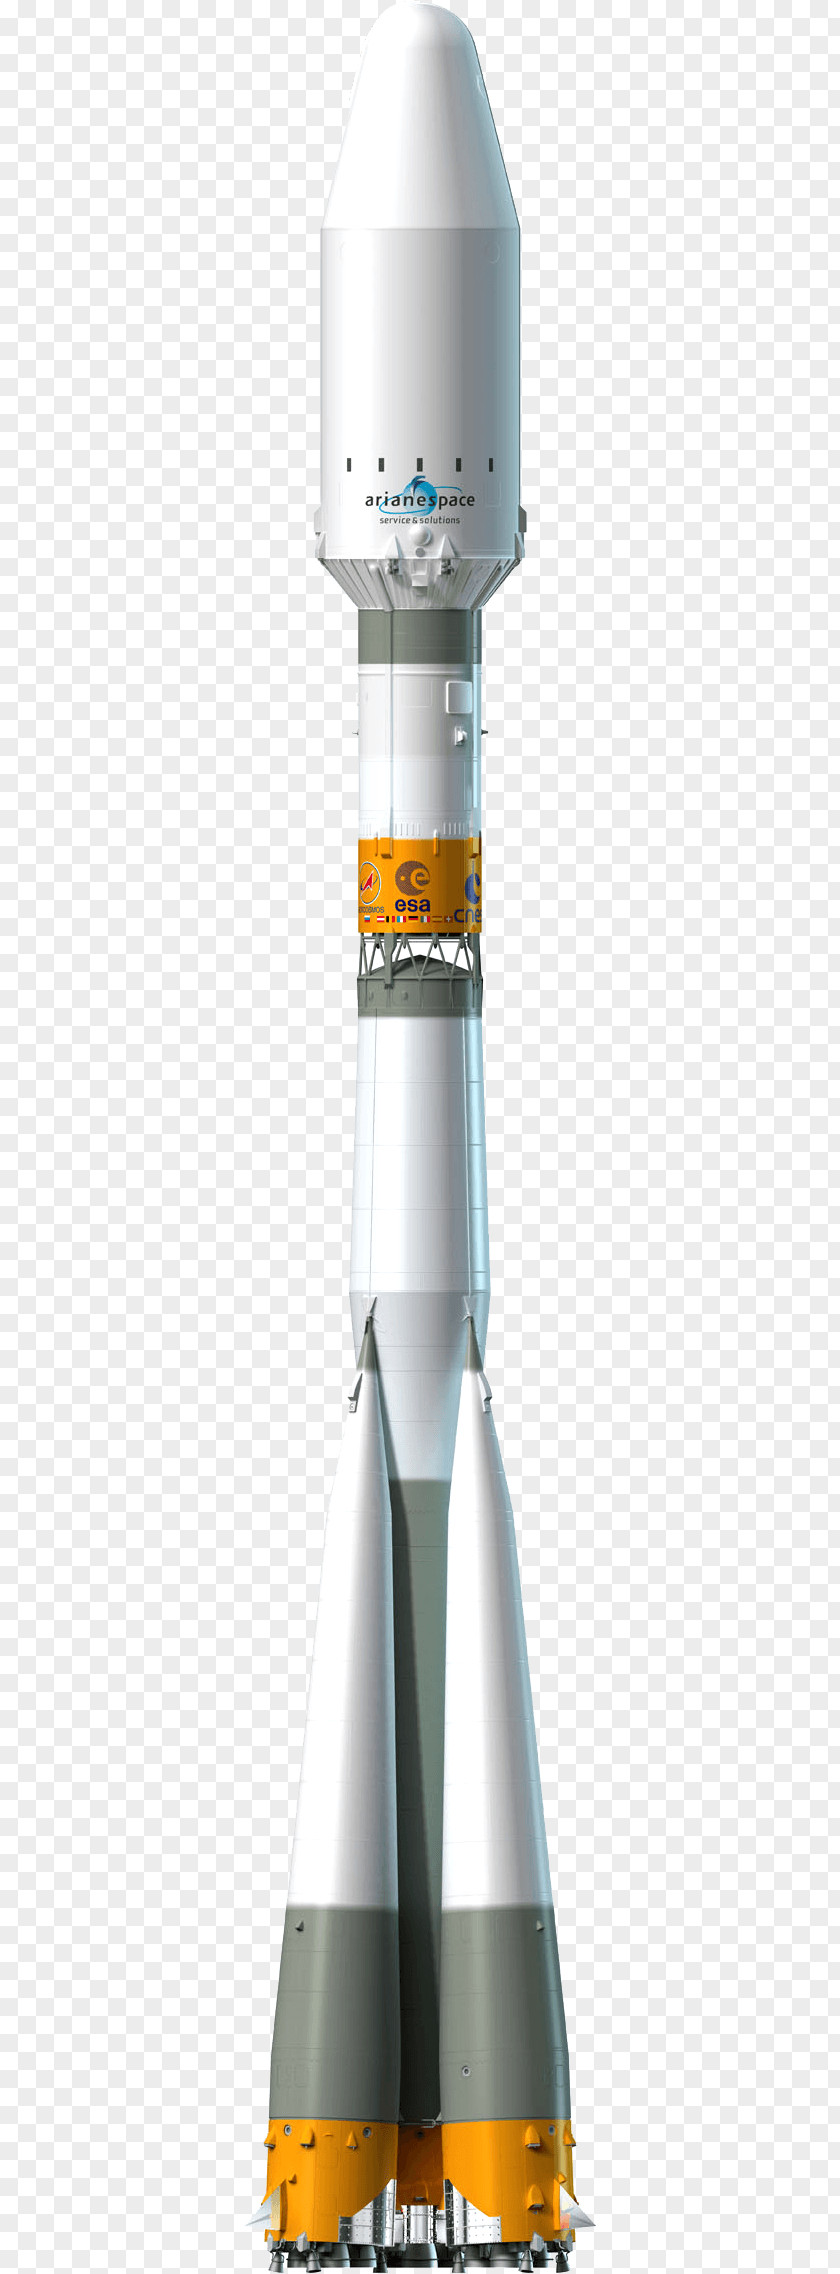 Manned Spaceship Soyuz At The Guiana Space Centre Rocket Launch Vehicle Arianespace PNG